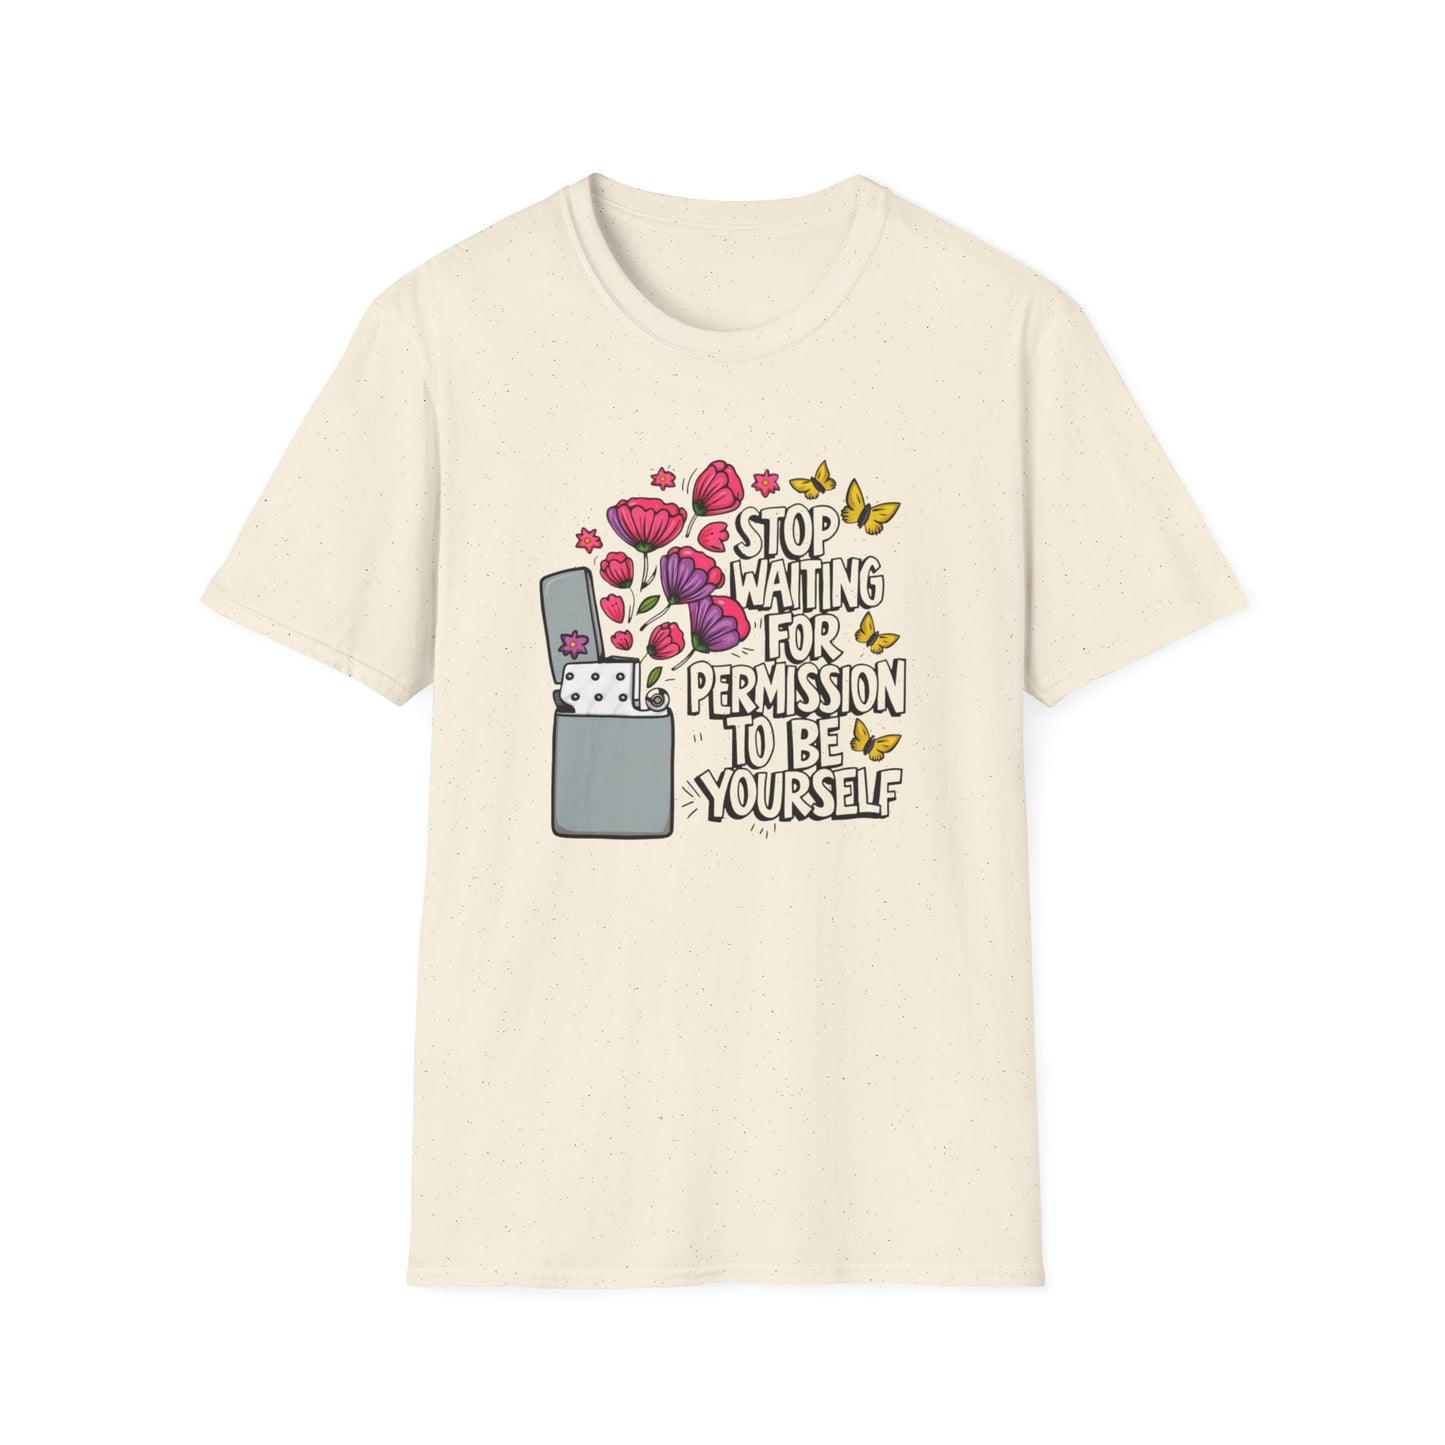 STOP WAITING TO BE YOURSELF CLASSIC FIT T-SHIRT